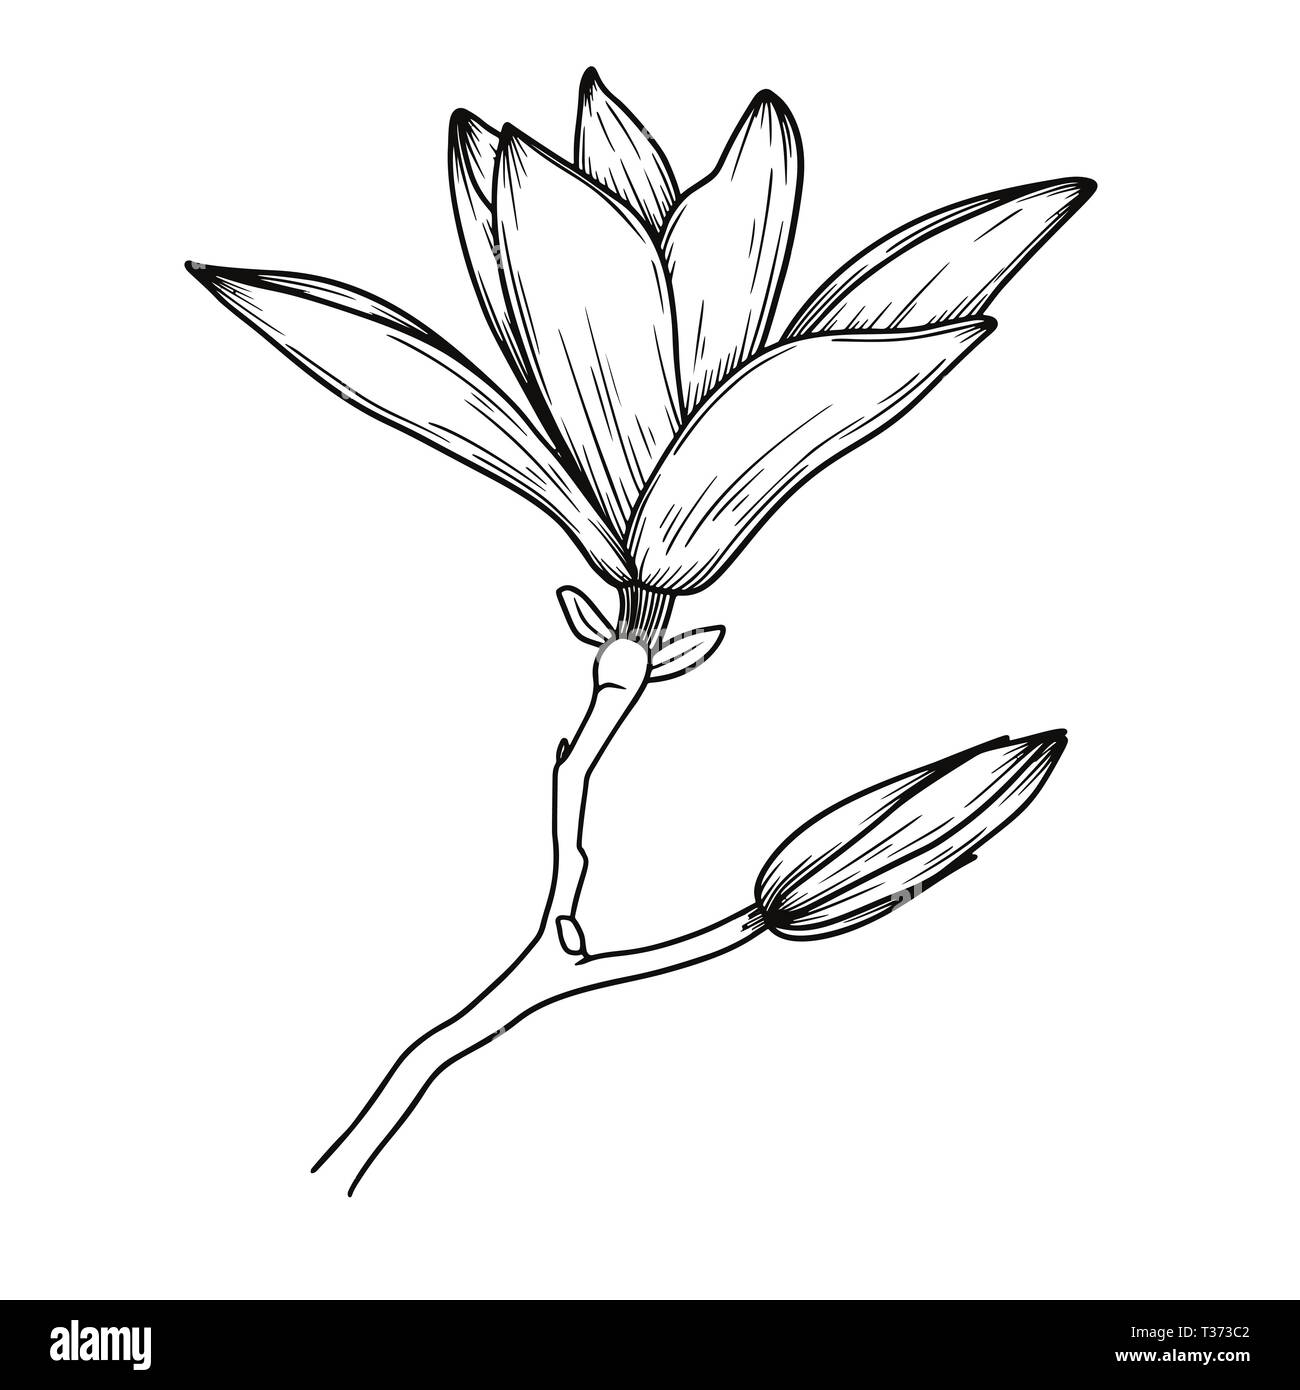 Magnolia flowers. Realistic sketch of a blooming flower. Vector illustration in sketch style. Stock Vector